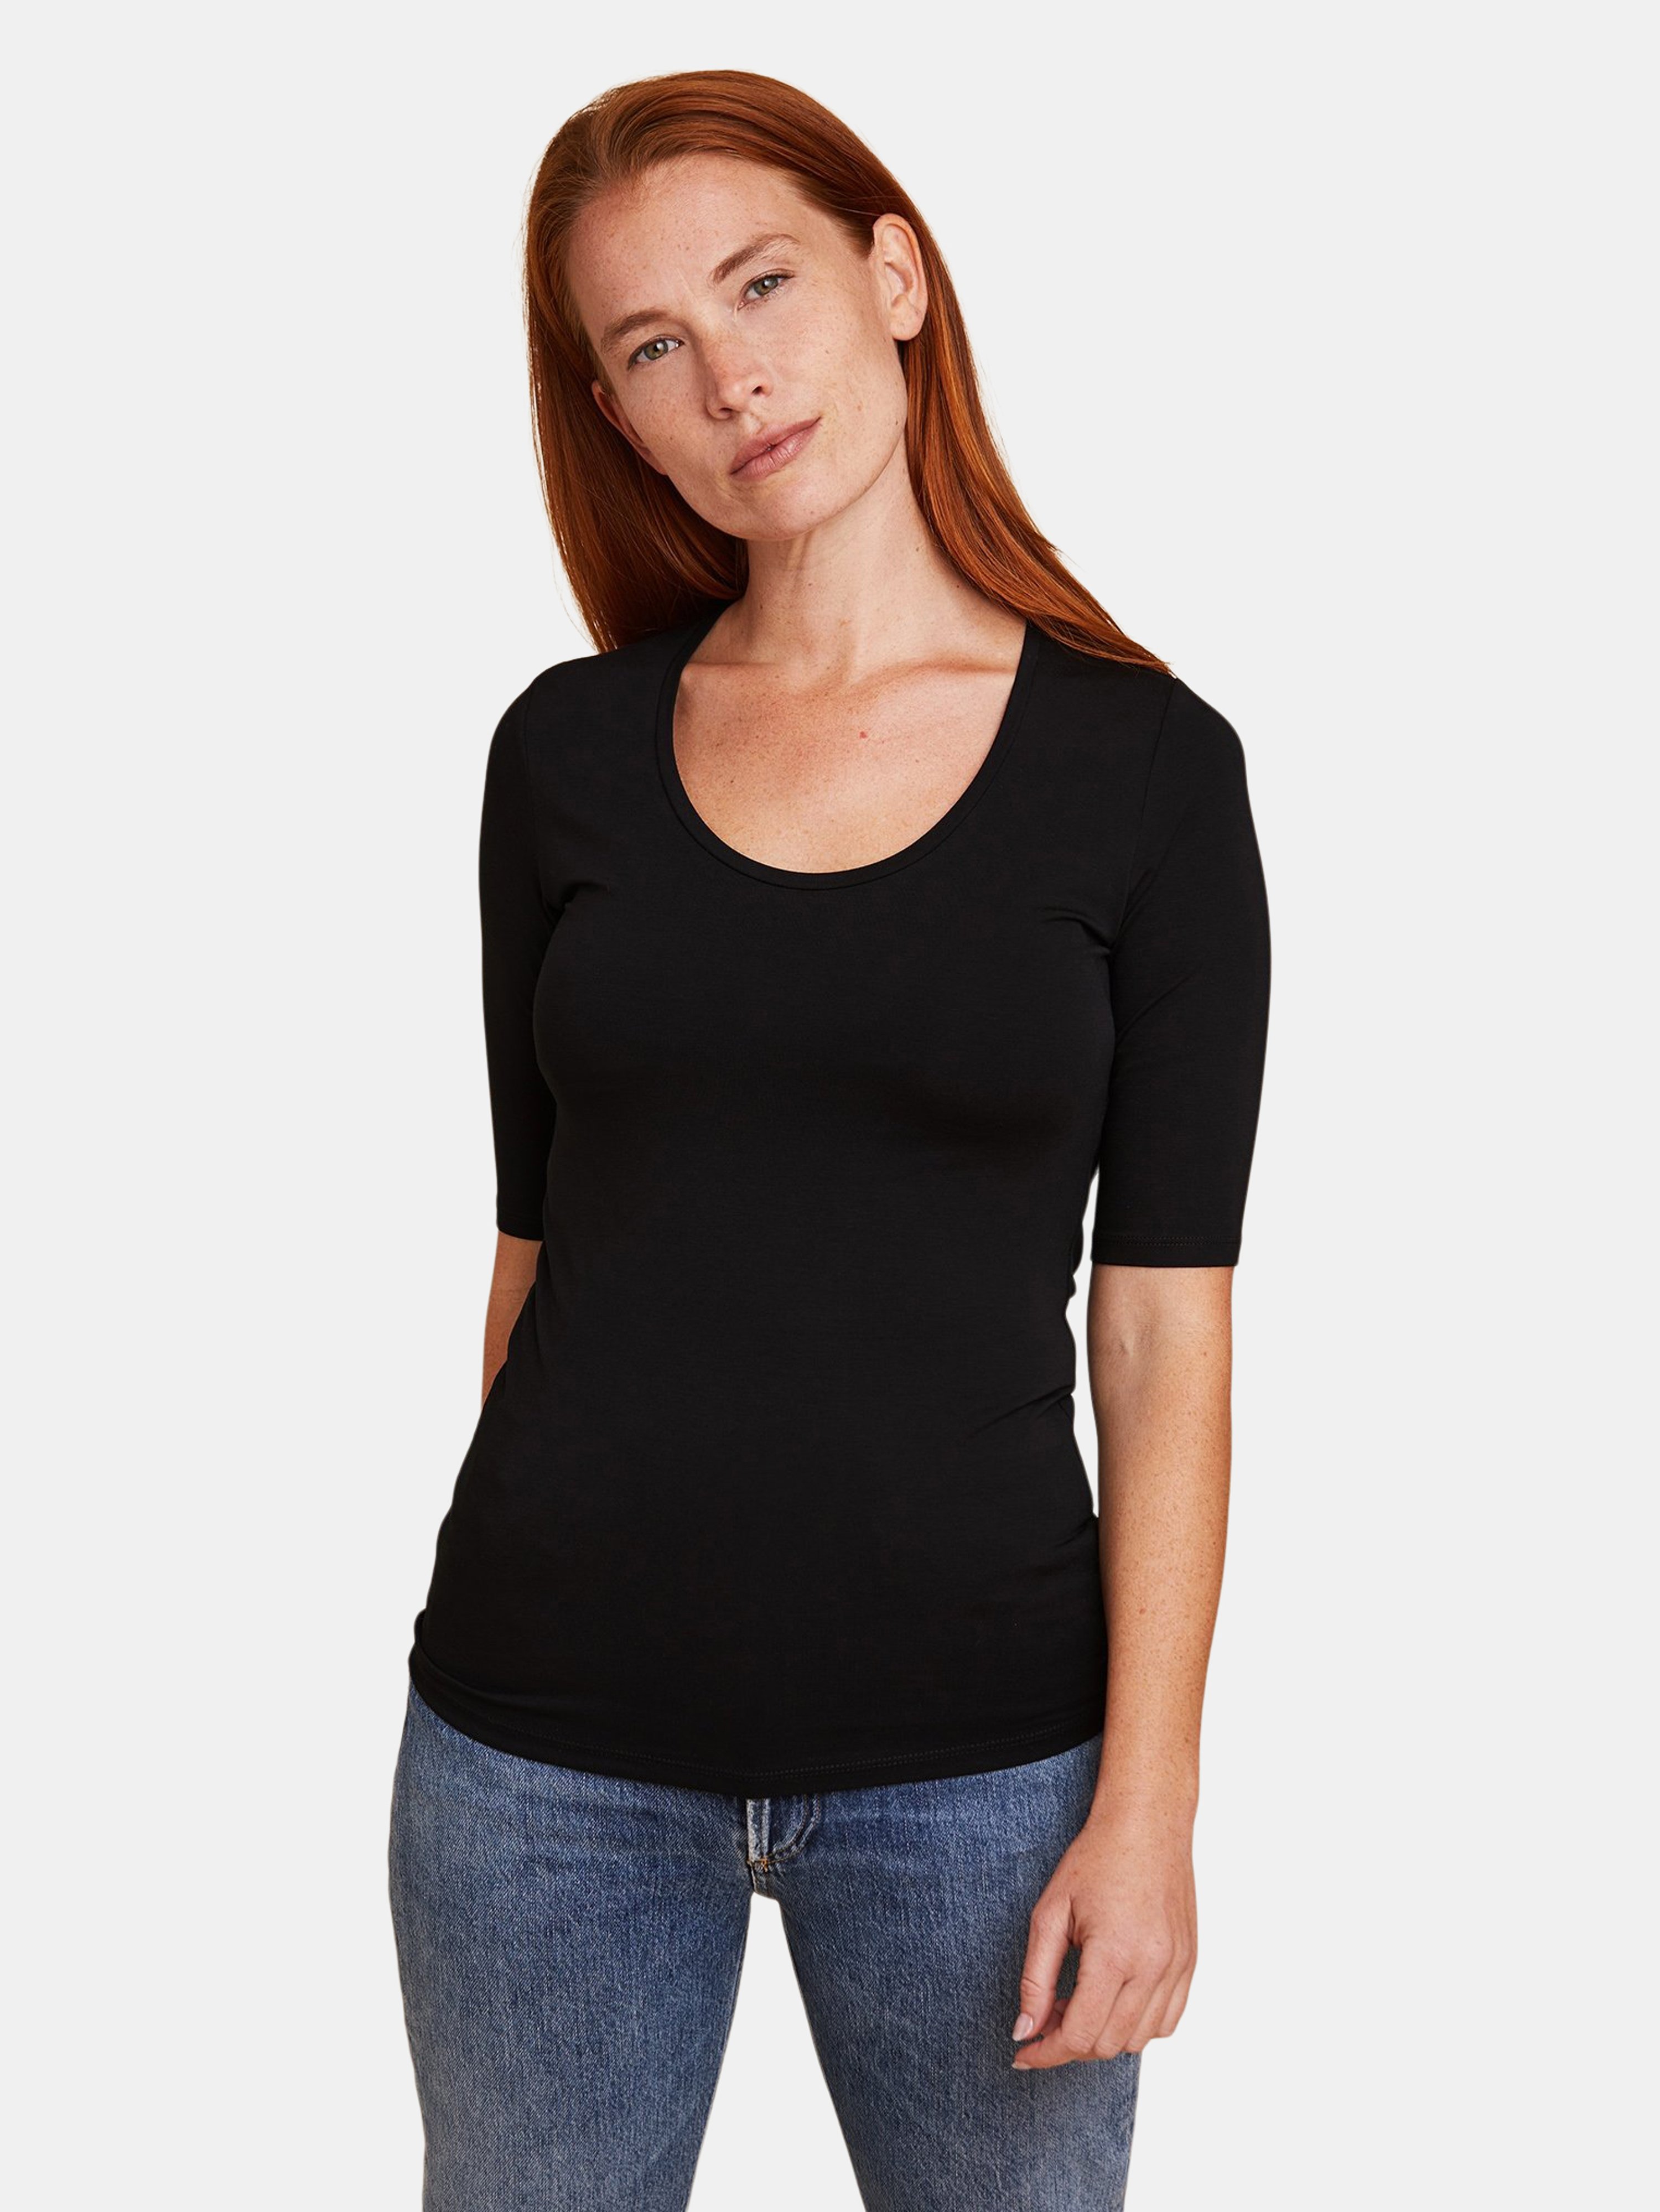 MAJESTIC MAJESTIC SOFT TOUCH ELBOW SLEEVE SCOOP NECK